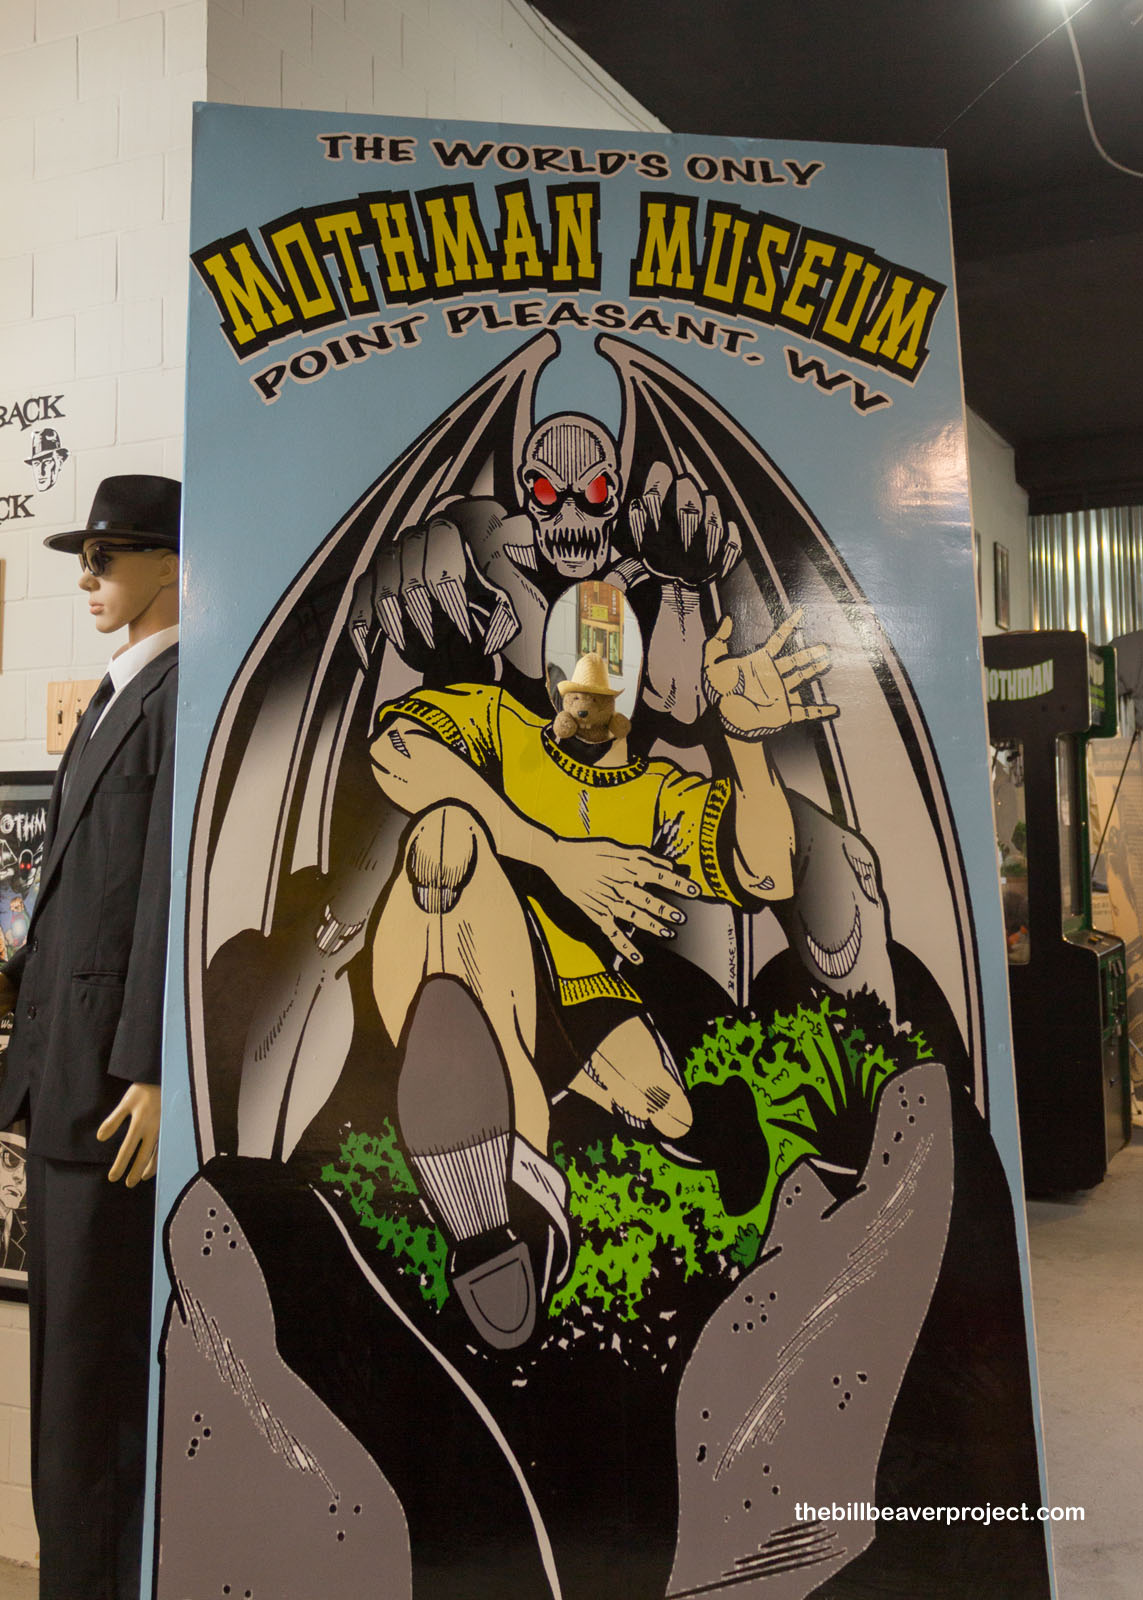 The World's Only Mothman Museum